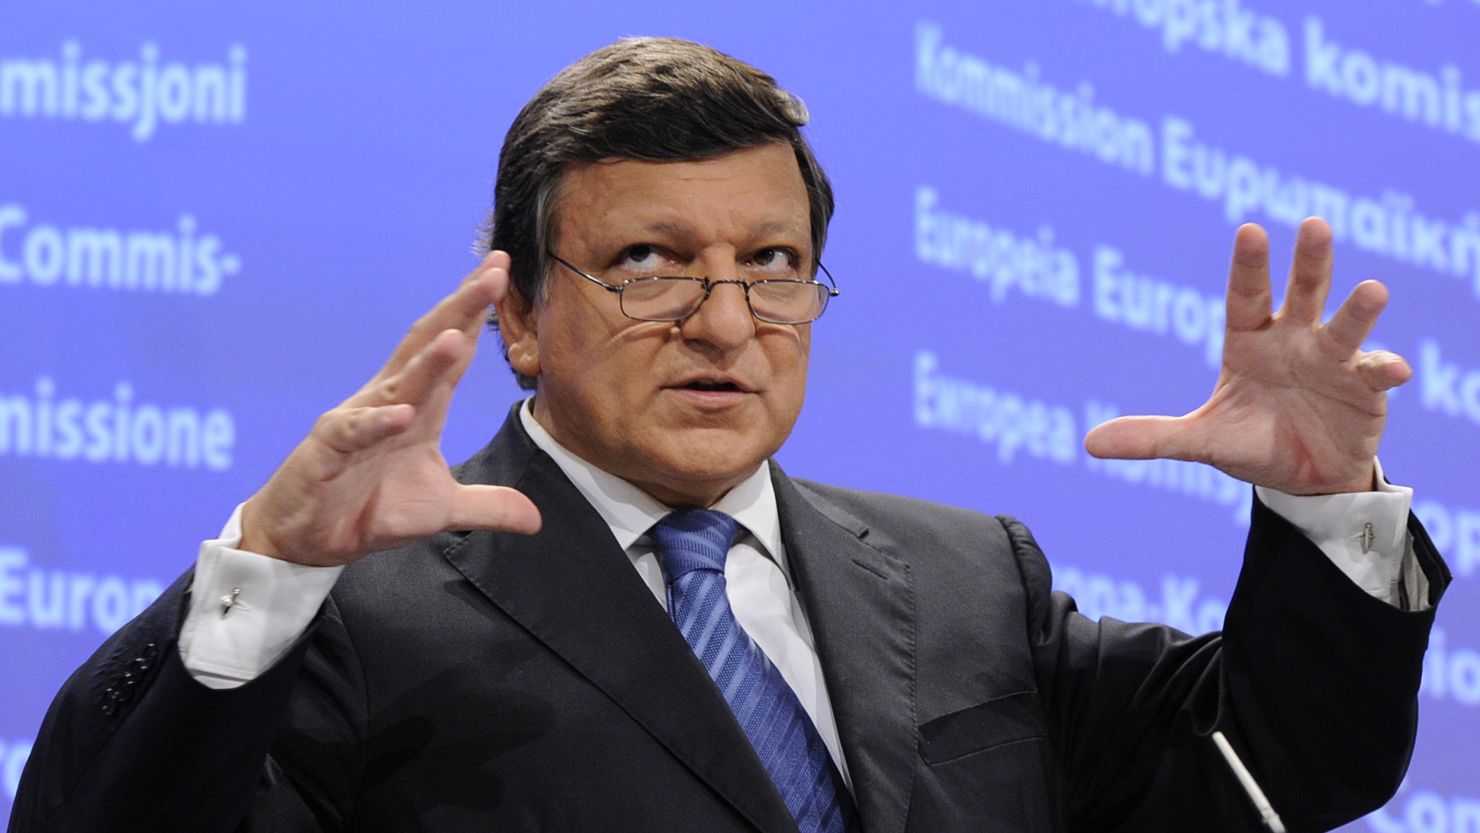 Jose Manuel Barroso speaks at a press conference at the EU headquarters in Brussels, on October 5, 2011.